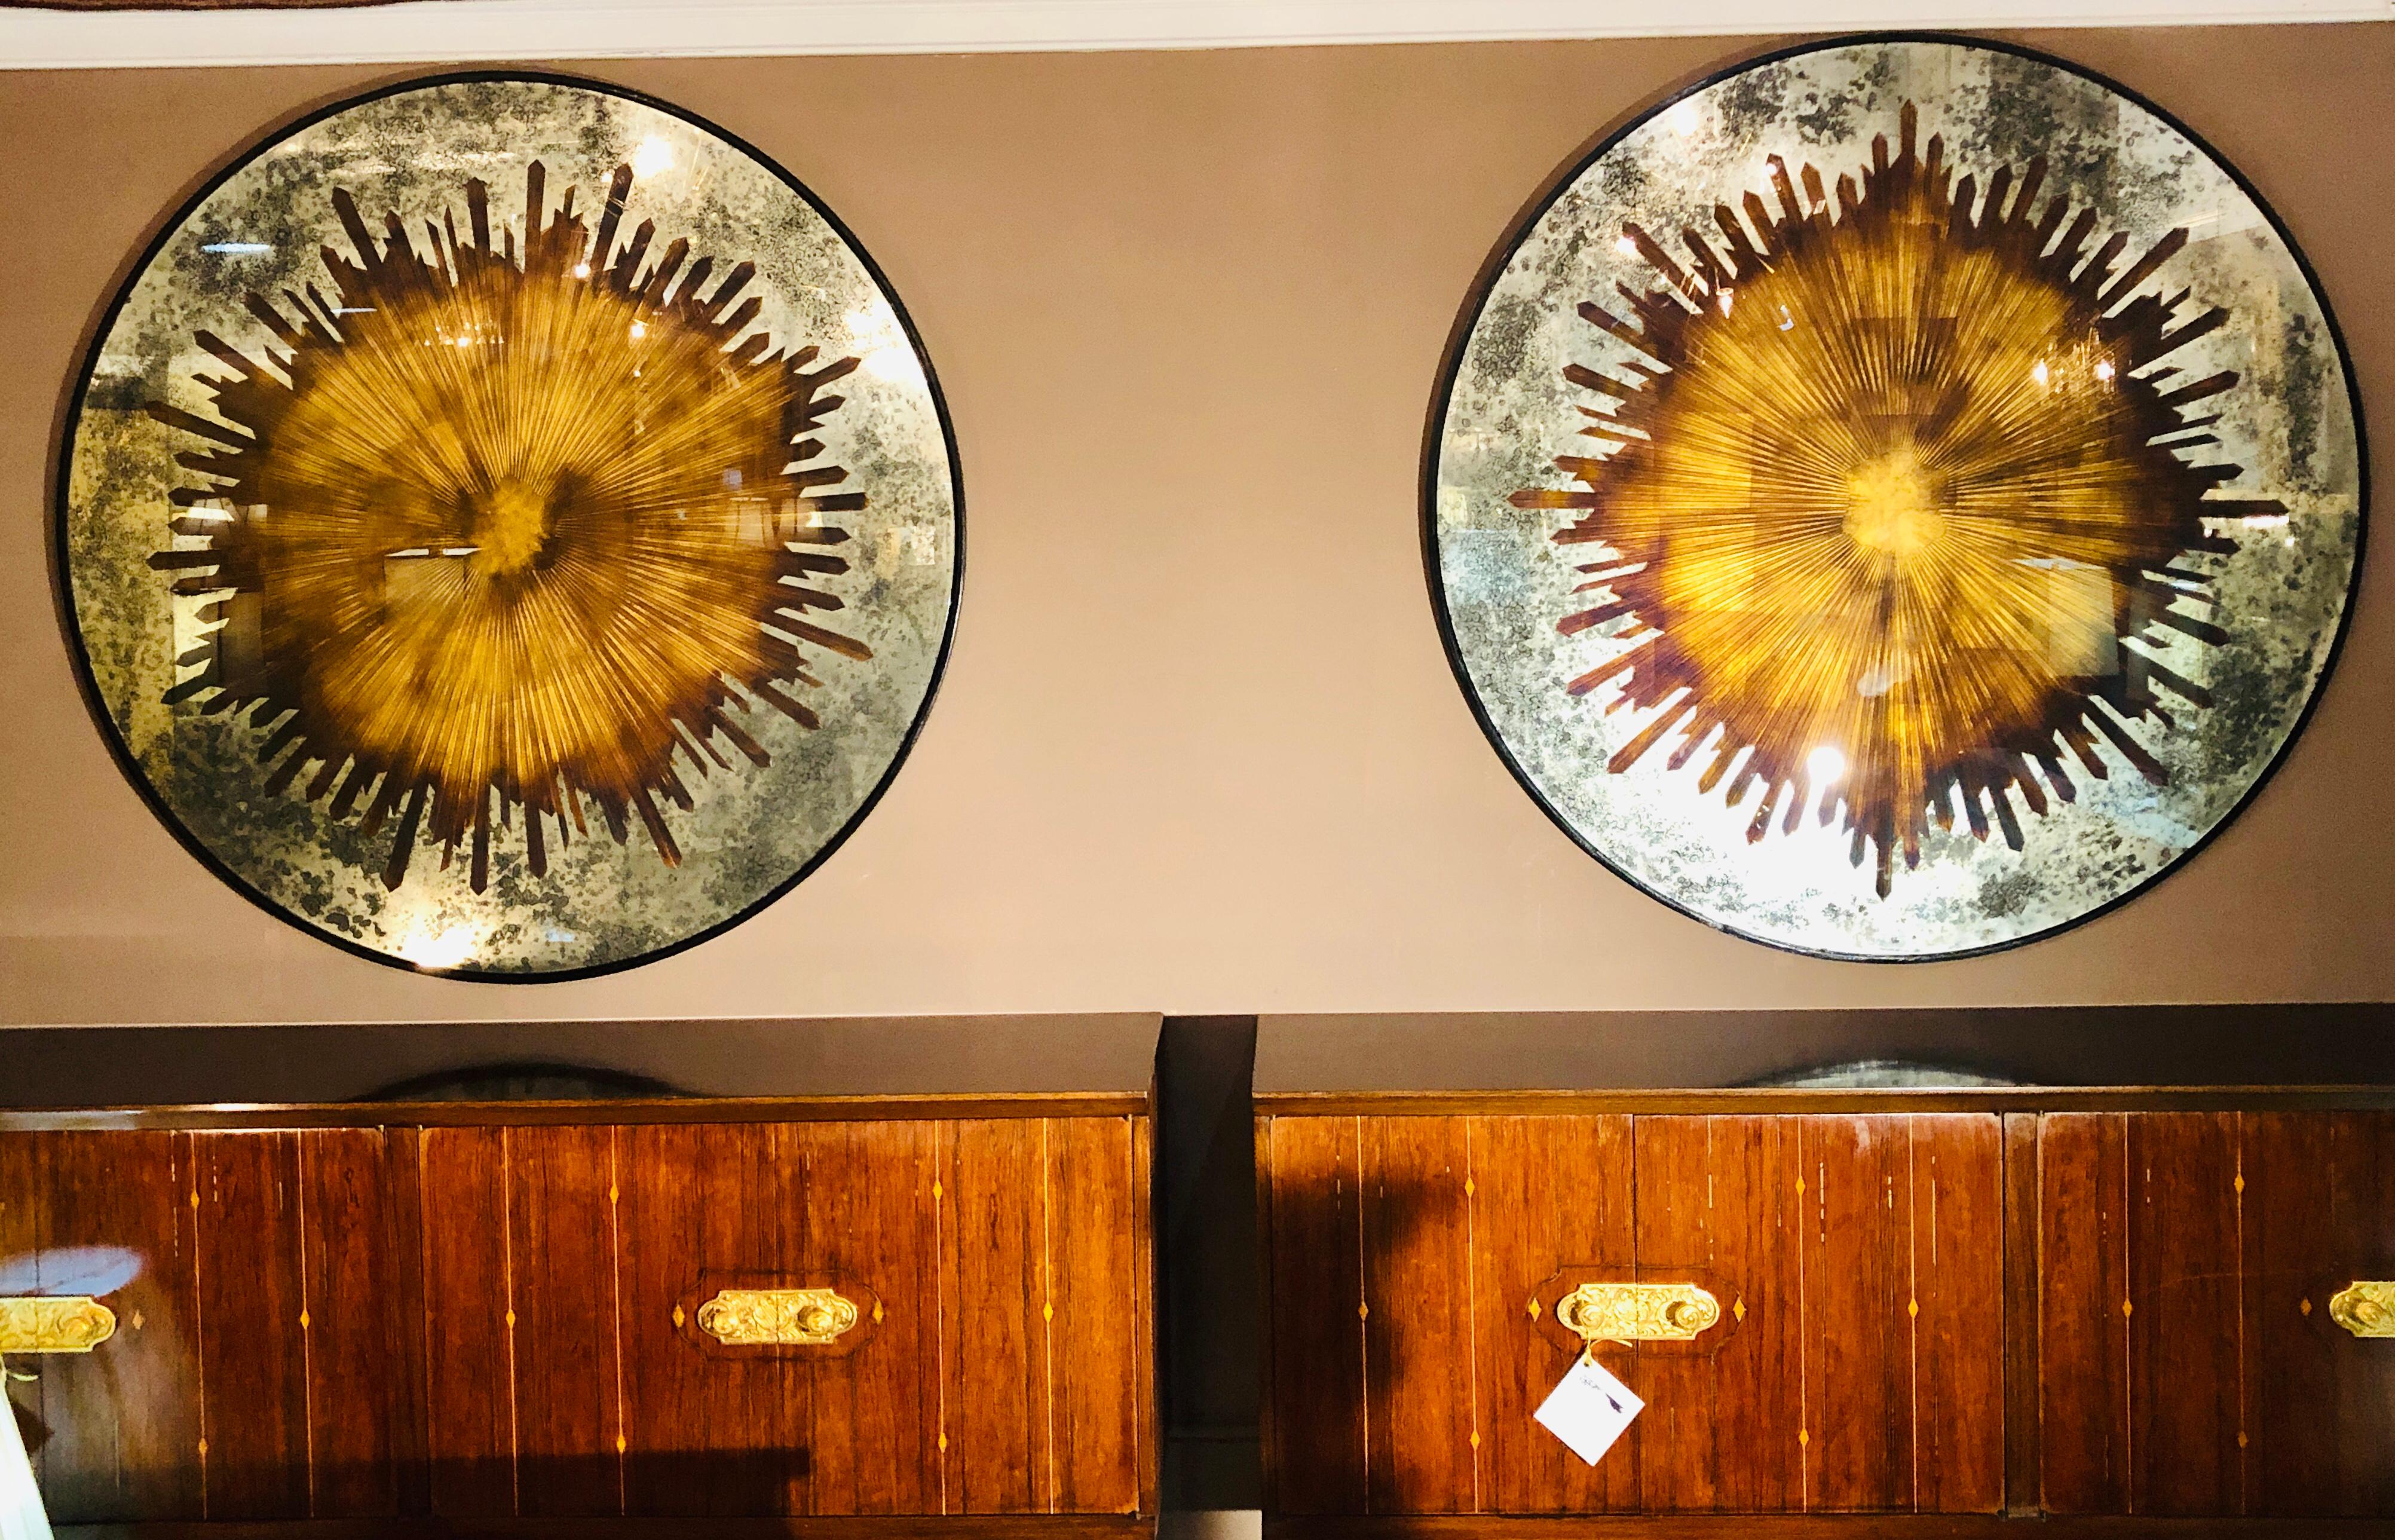 Pair of monumental carved gilt gold and silver glass Art Deco sunburst wall mirrors or table tops. These spectacular finely decorative mirrors would make a splash weather hanging on the wall or sitting upon a metal table base. Can easily be used as